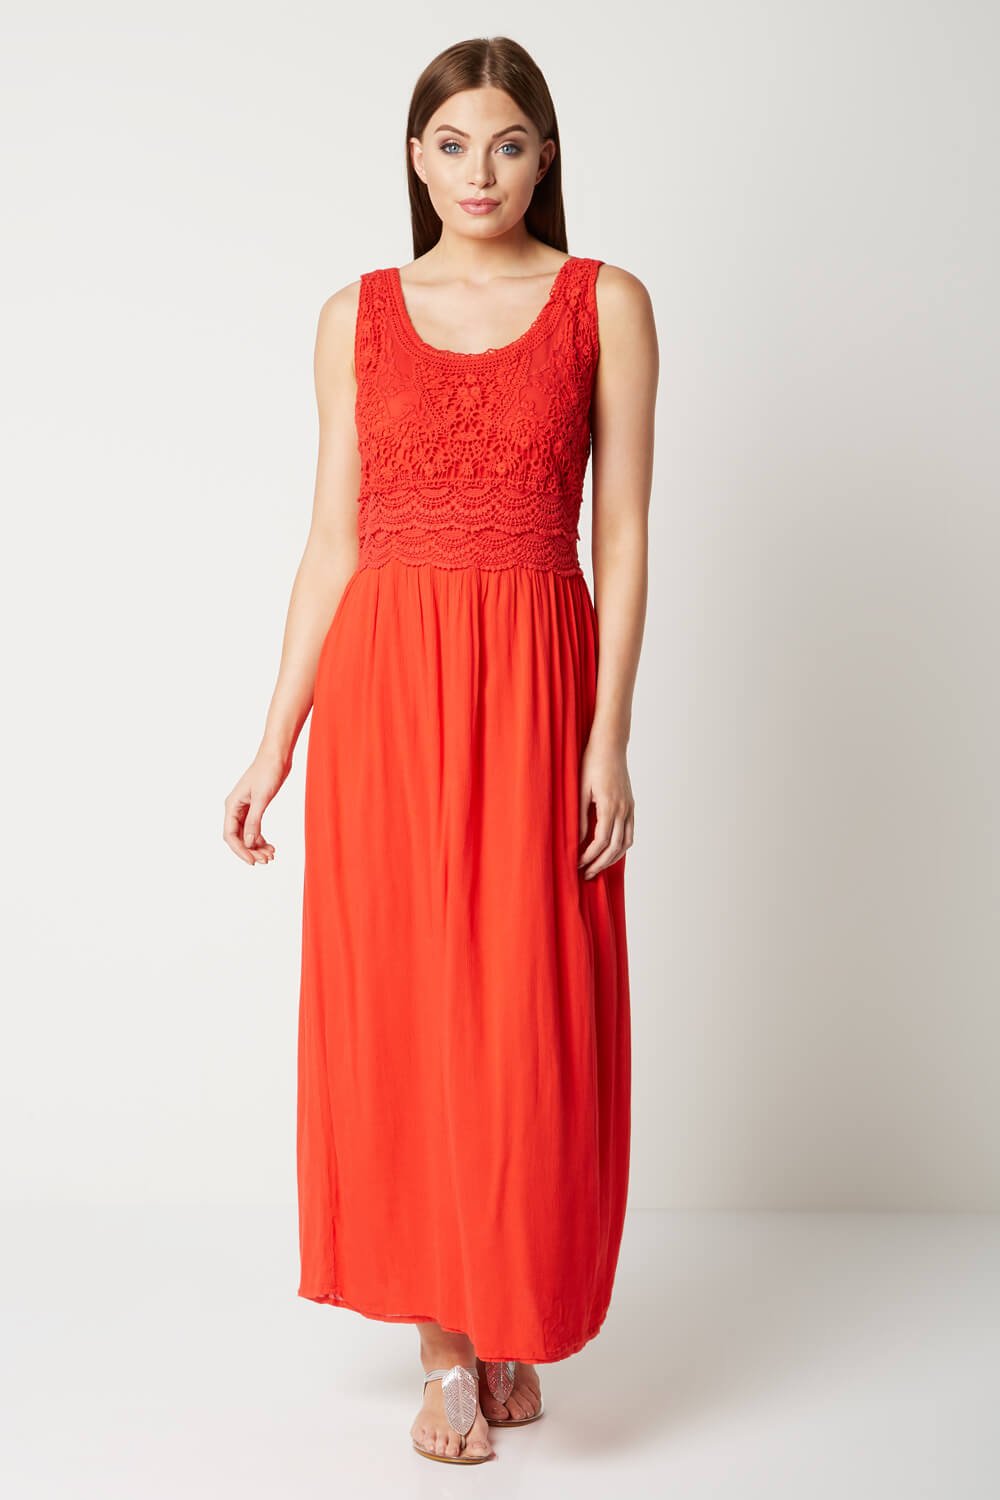 Cotton Embroidered Maxi Dress